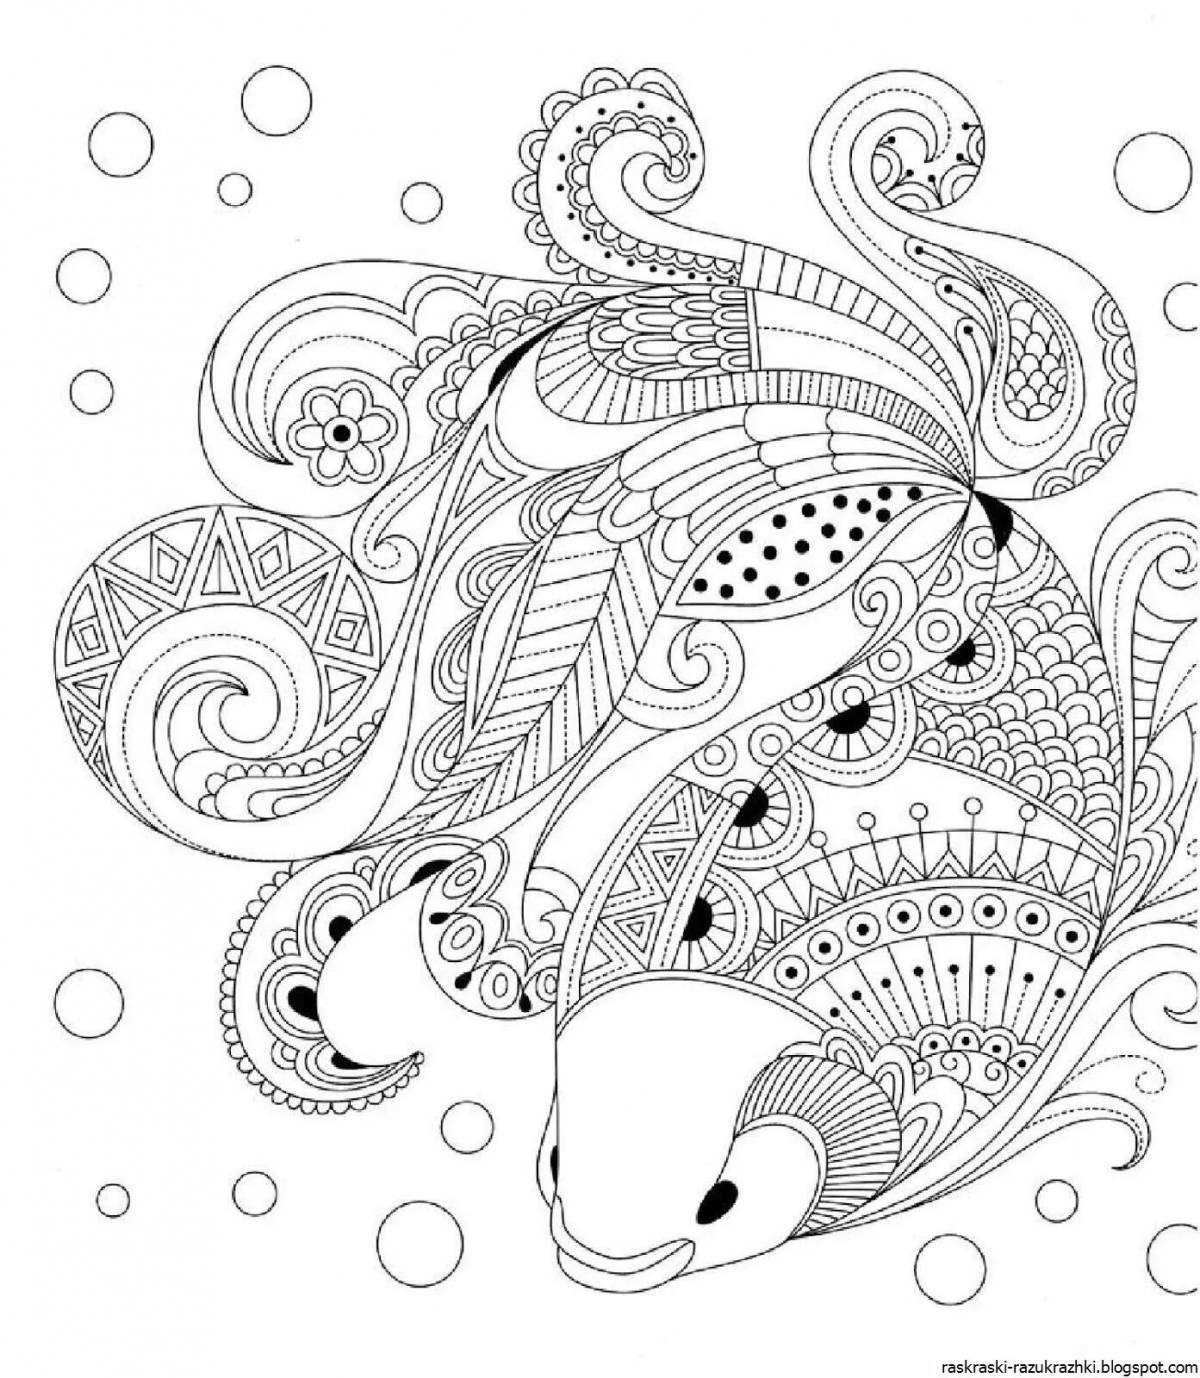 Adorable art therapy adult coloring book